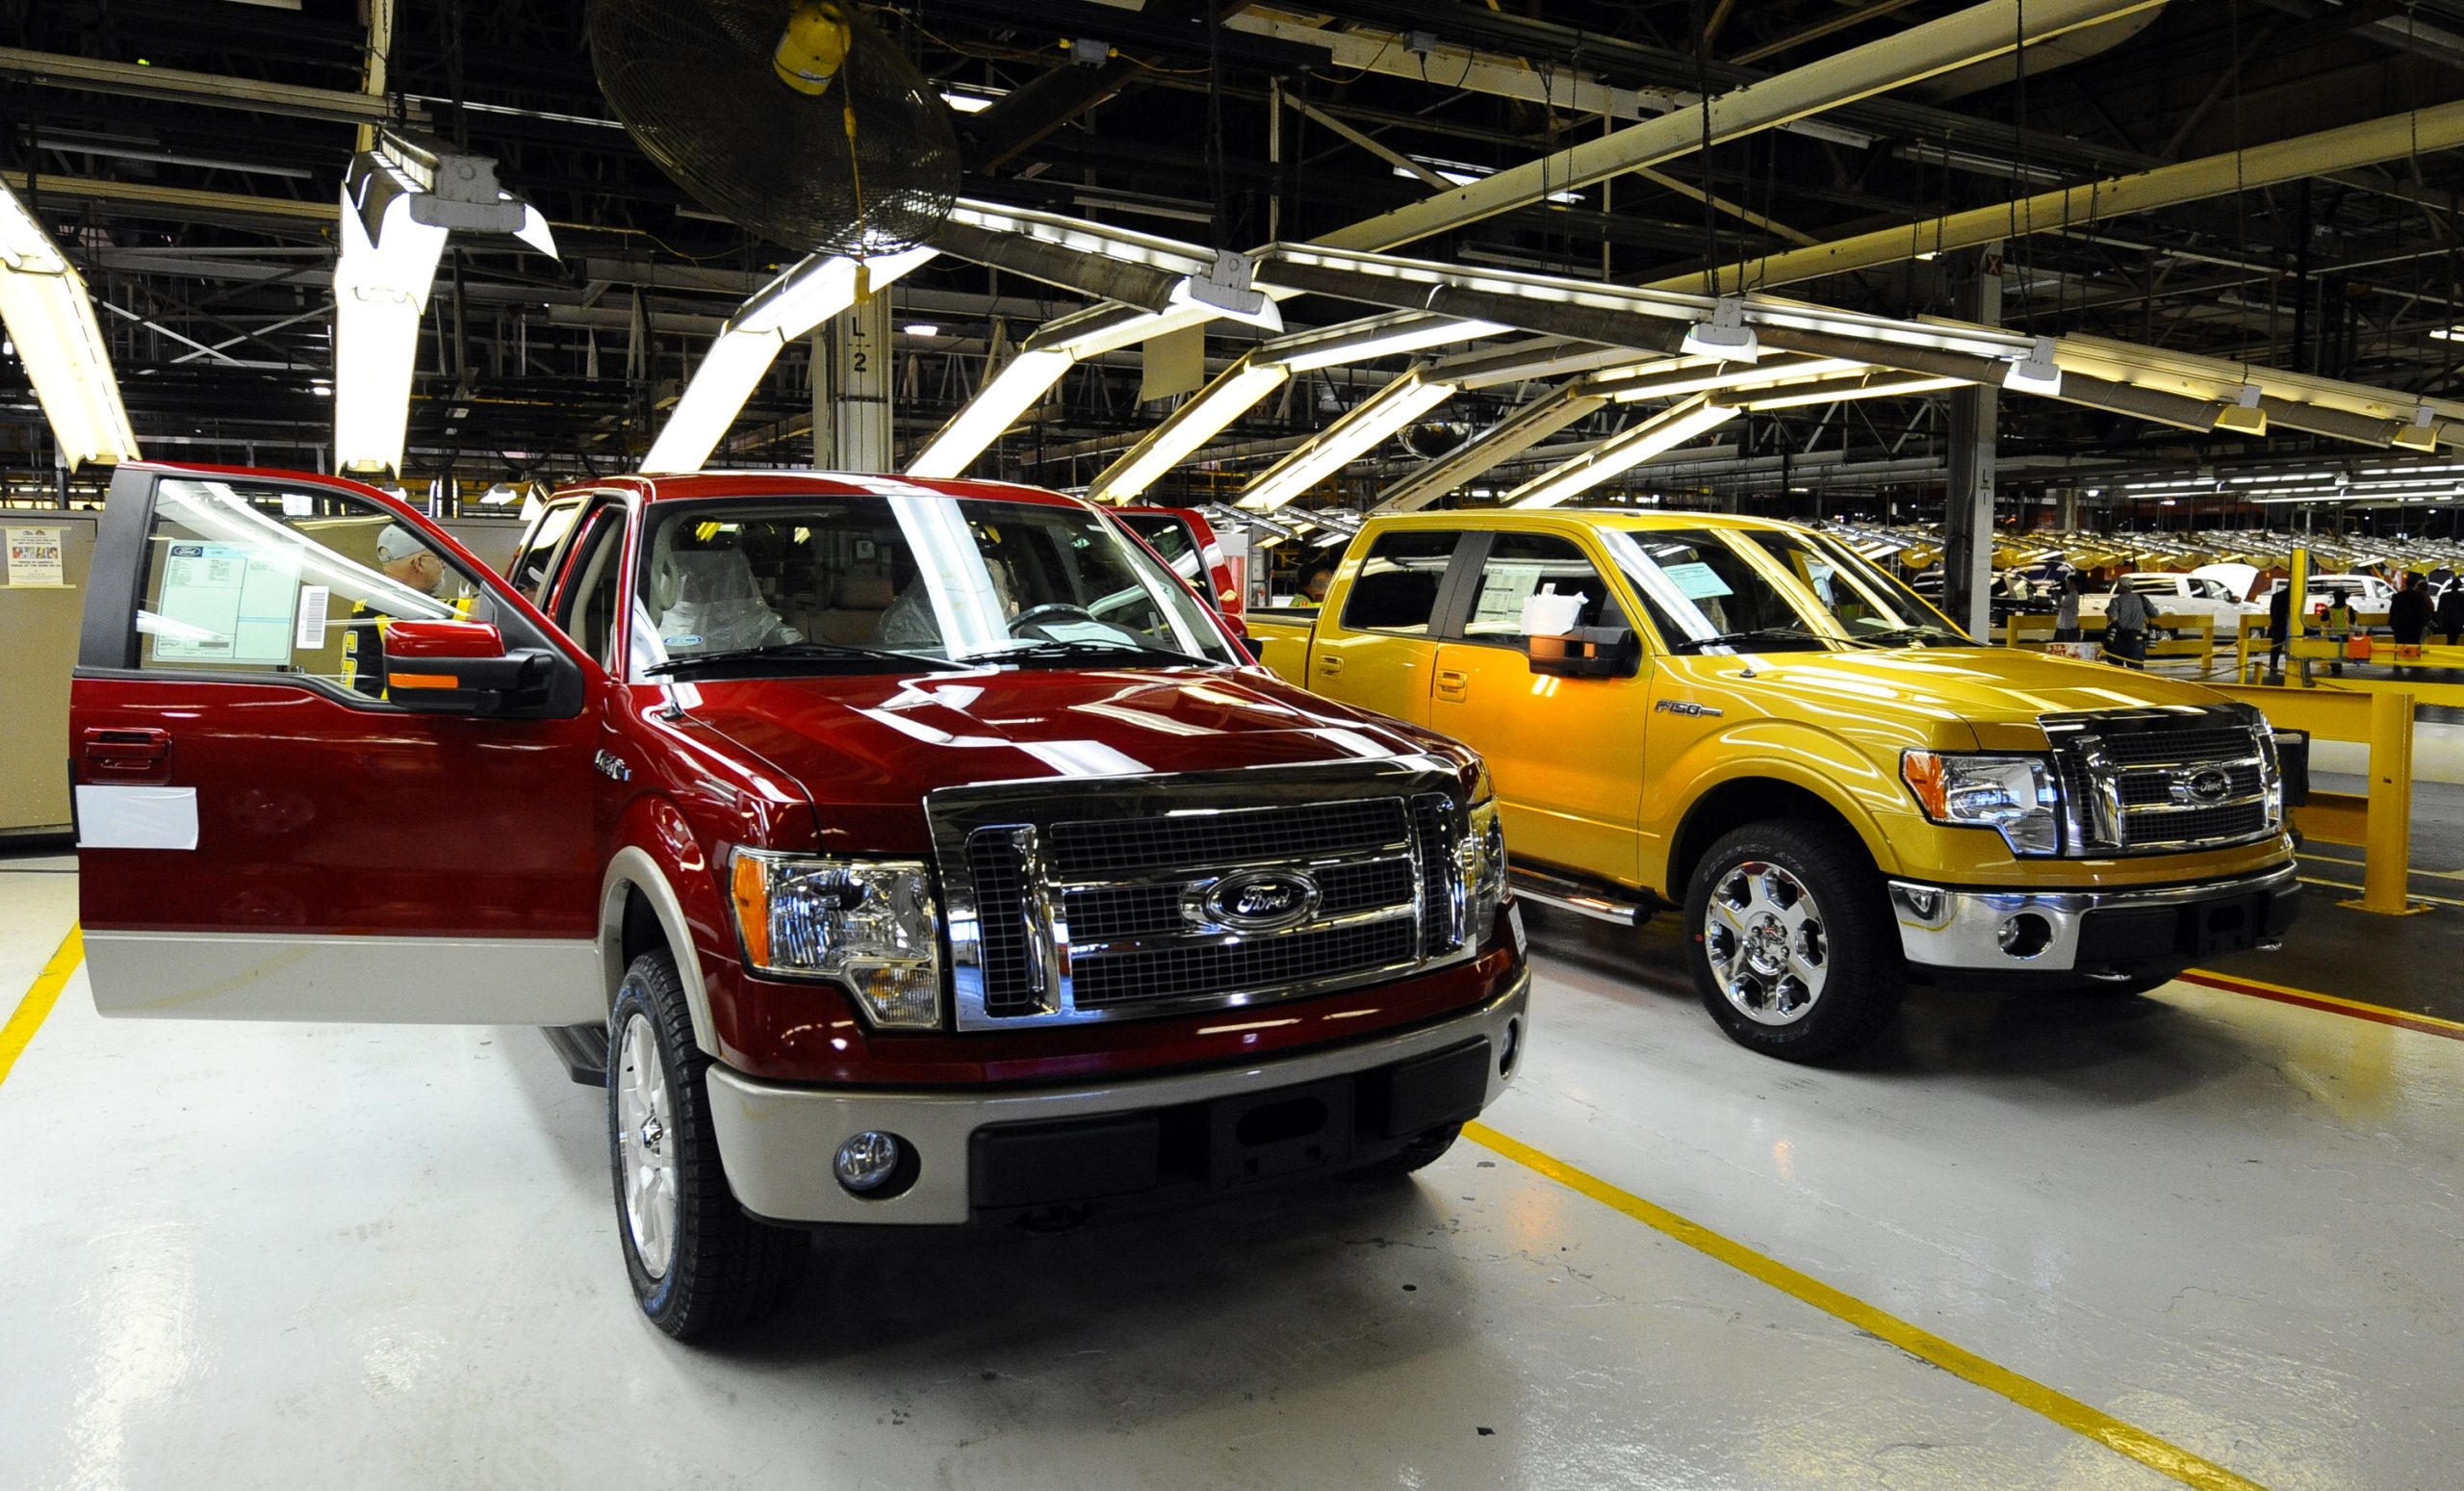 Two Ford F-150 trucks next to an assembly line